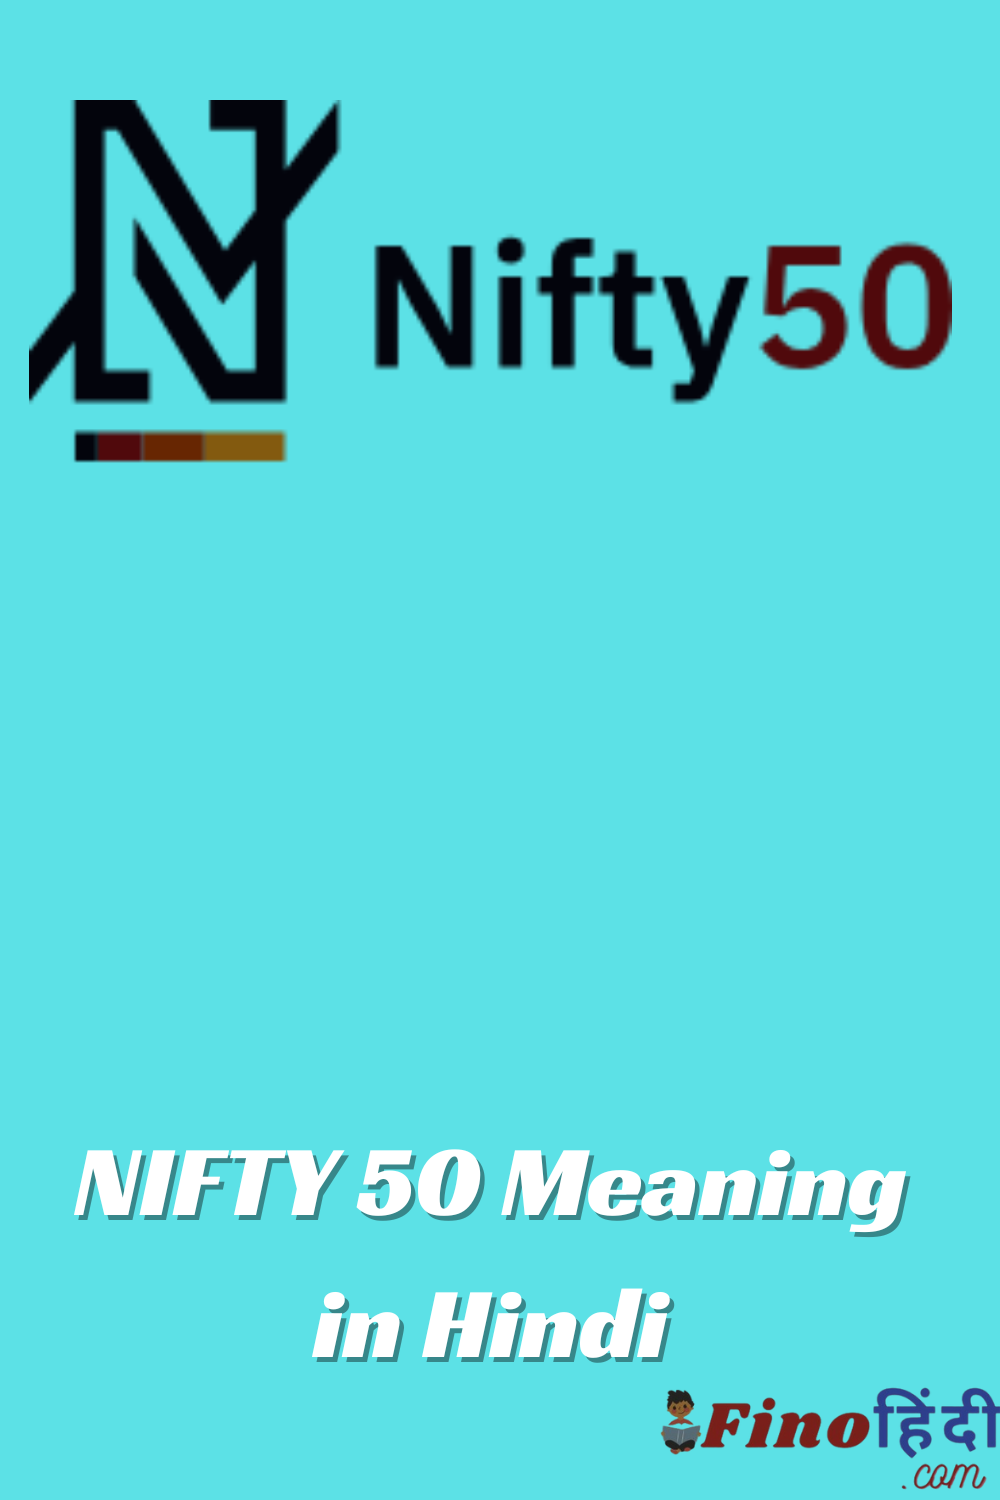 Nifty50: NSE unveils new brand identity for Nifty50 - The Economic Times